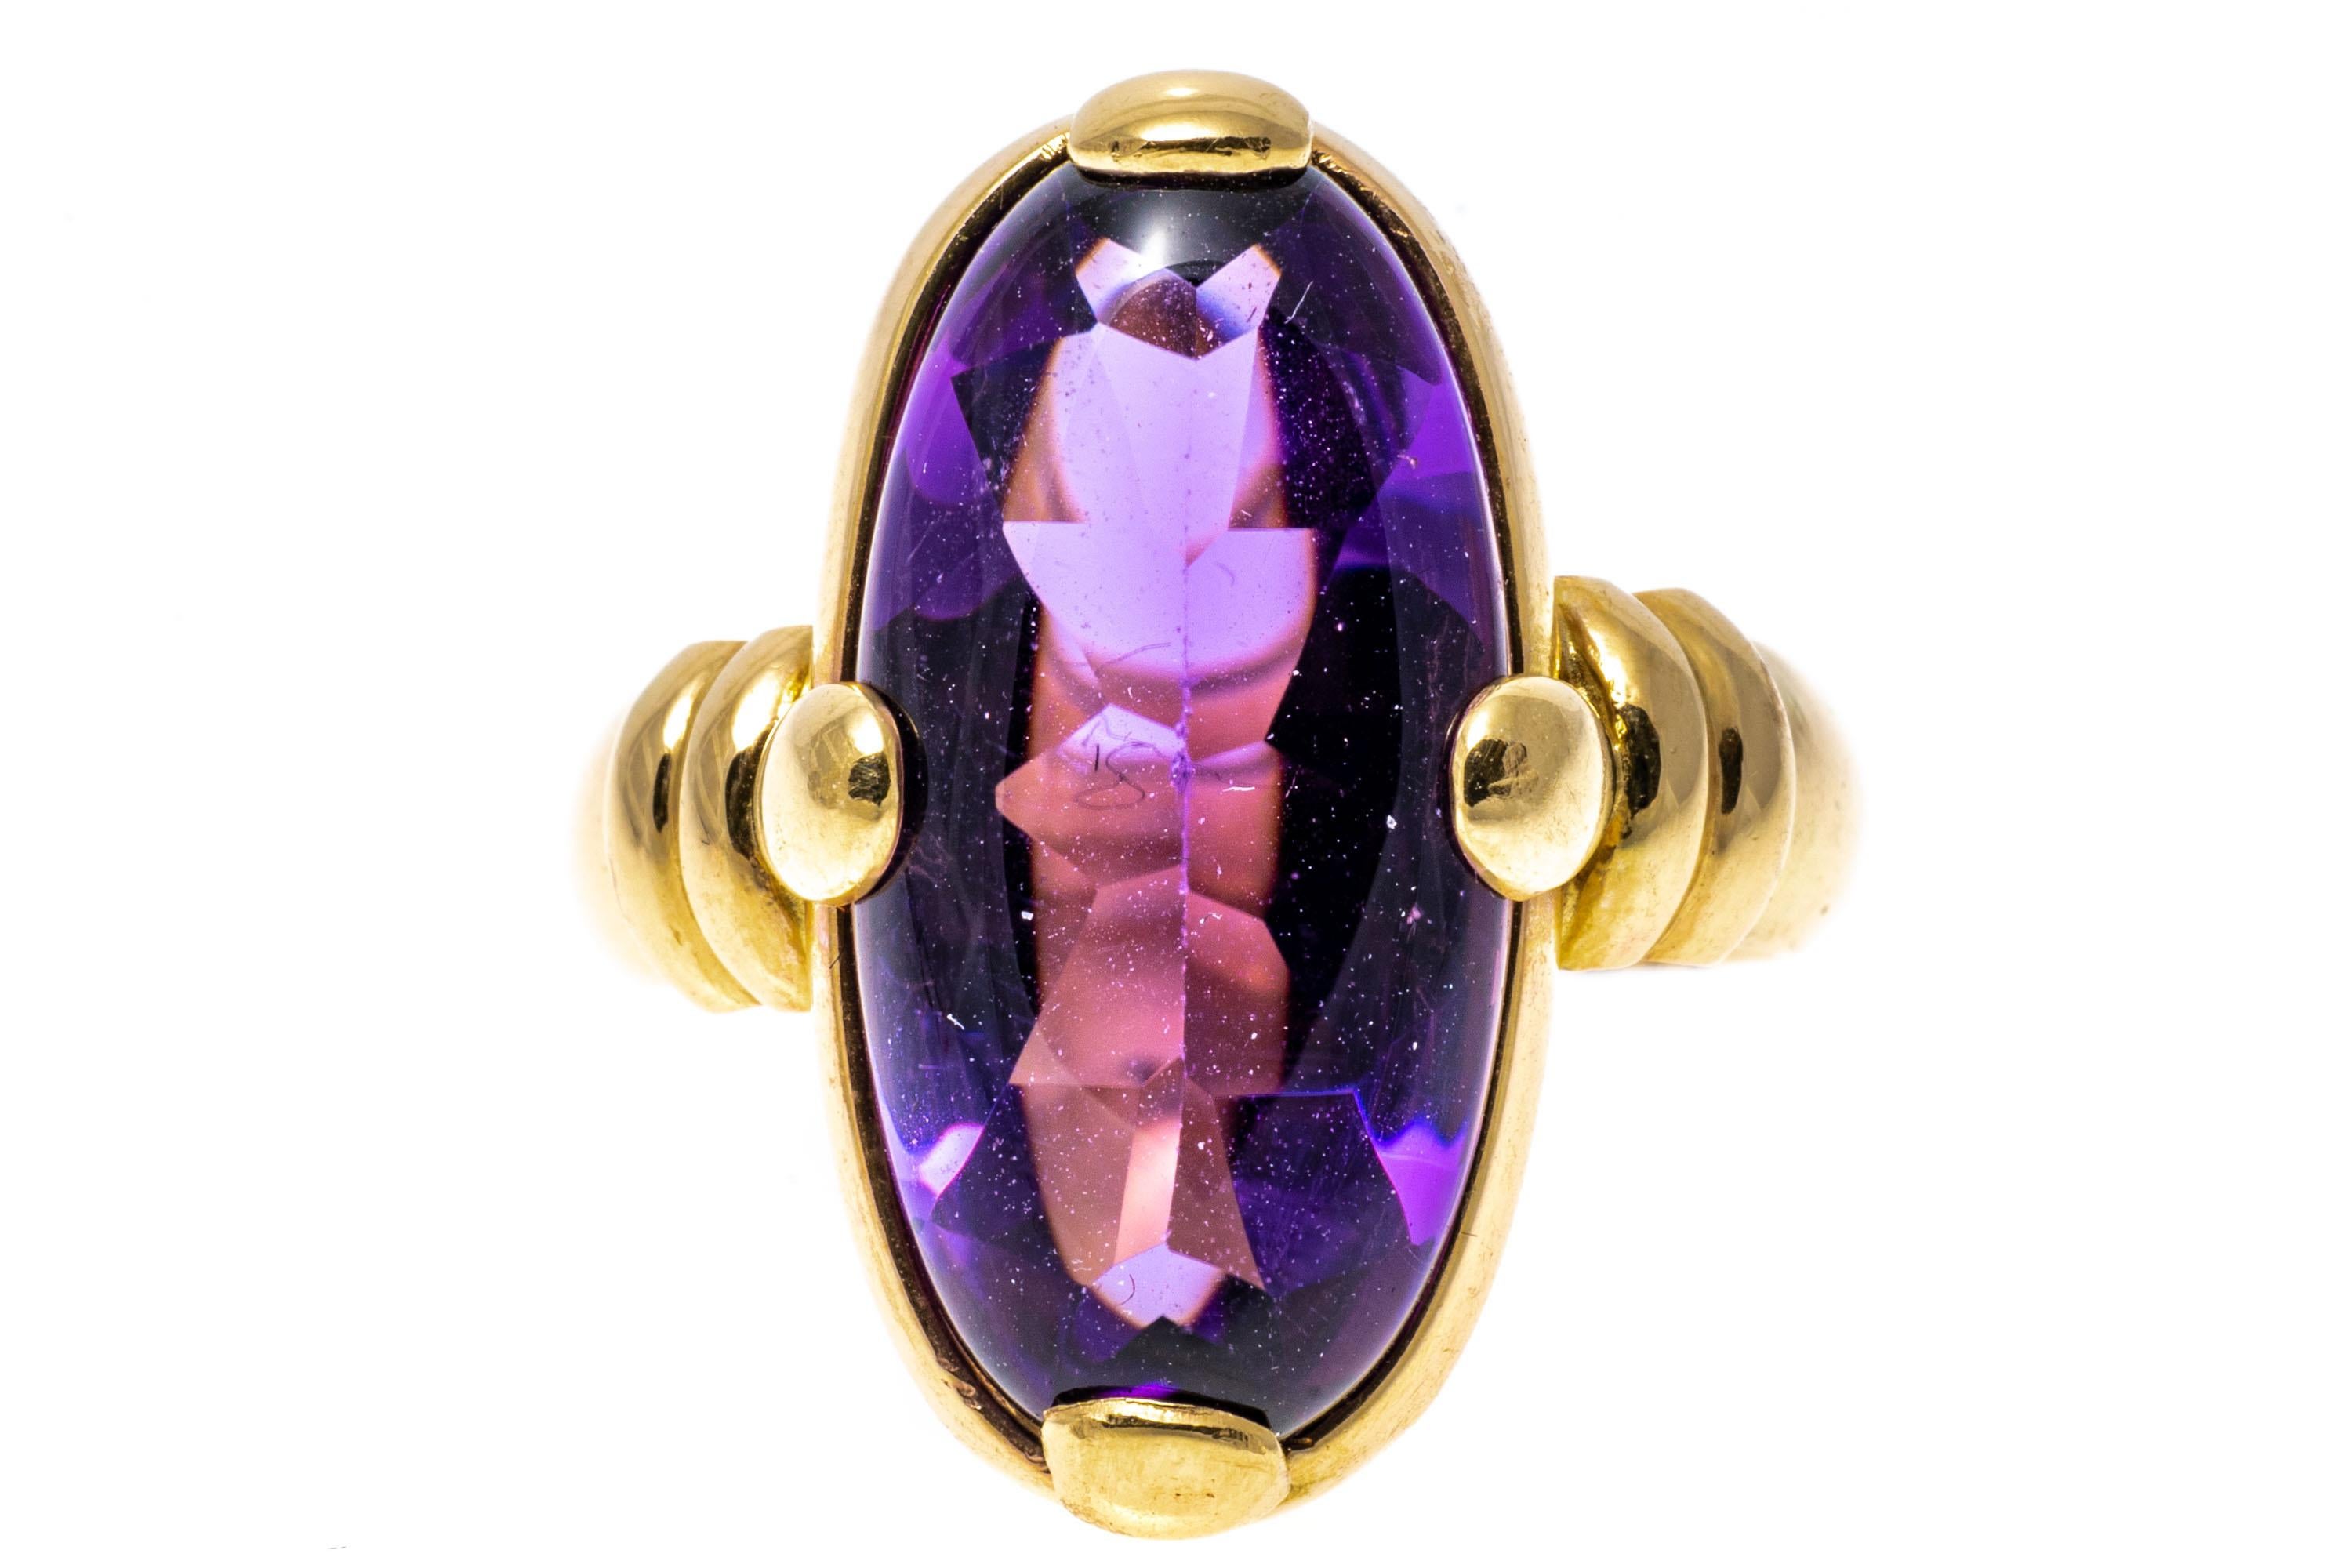 14k yellow gold ring. This pretty, uncommon ring has an elongated oval, half-faceted and half cabochon cut, dark purple color amethyst, set with wide prongs and finished with ribbed shoulders and a wide shank.
Marks: 14k
Dimensions: 3/8